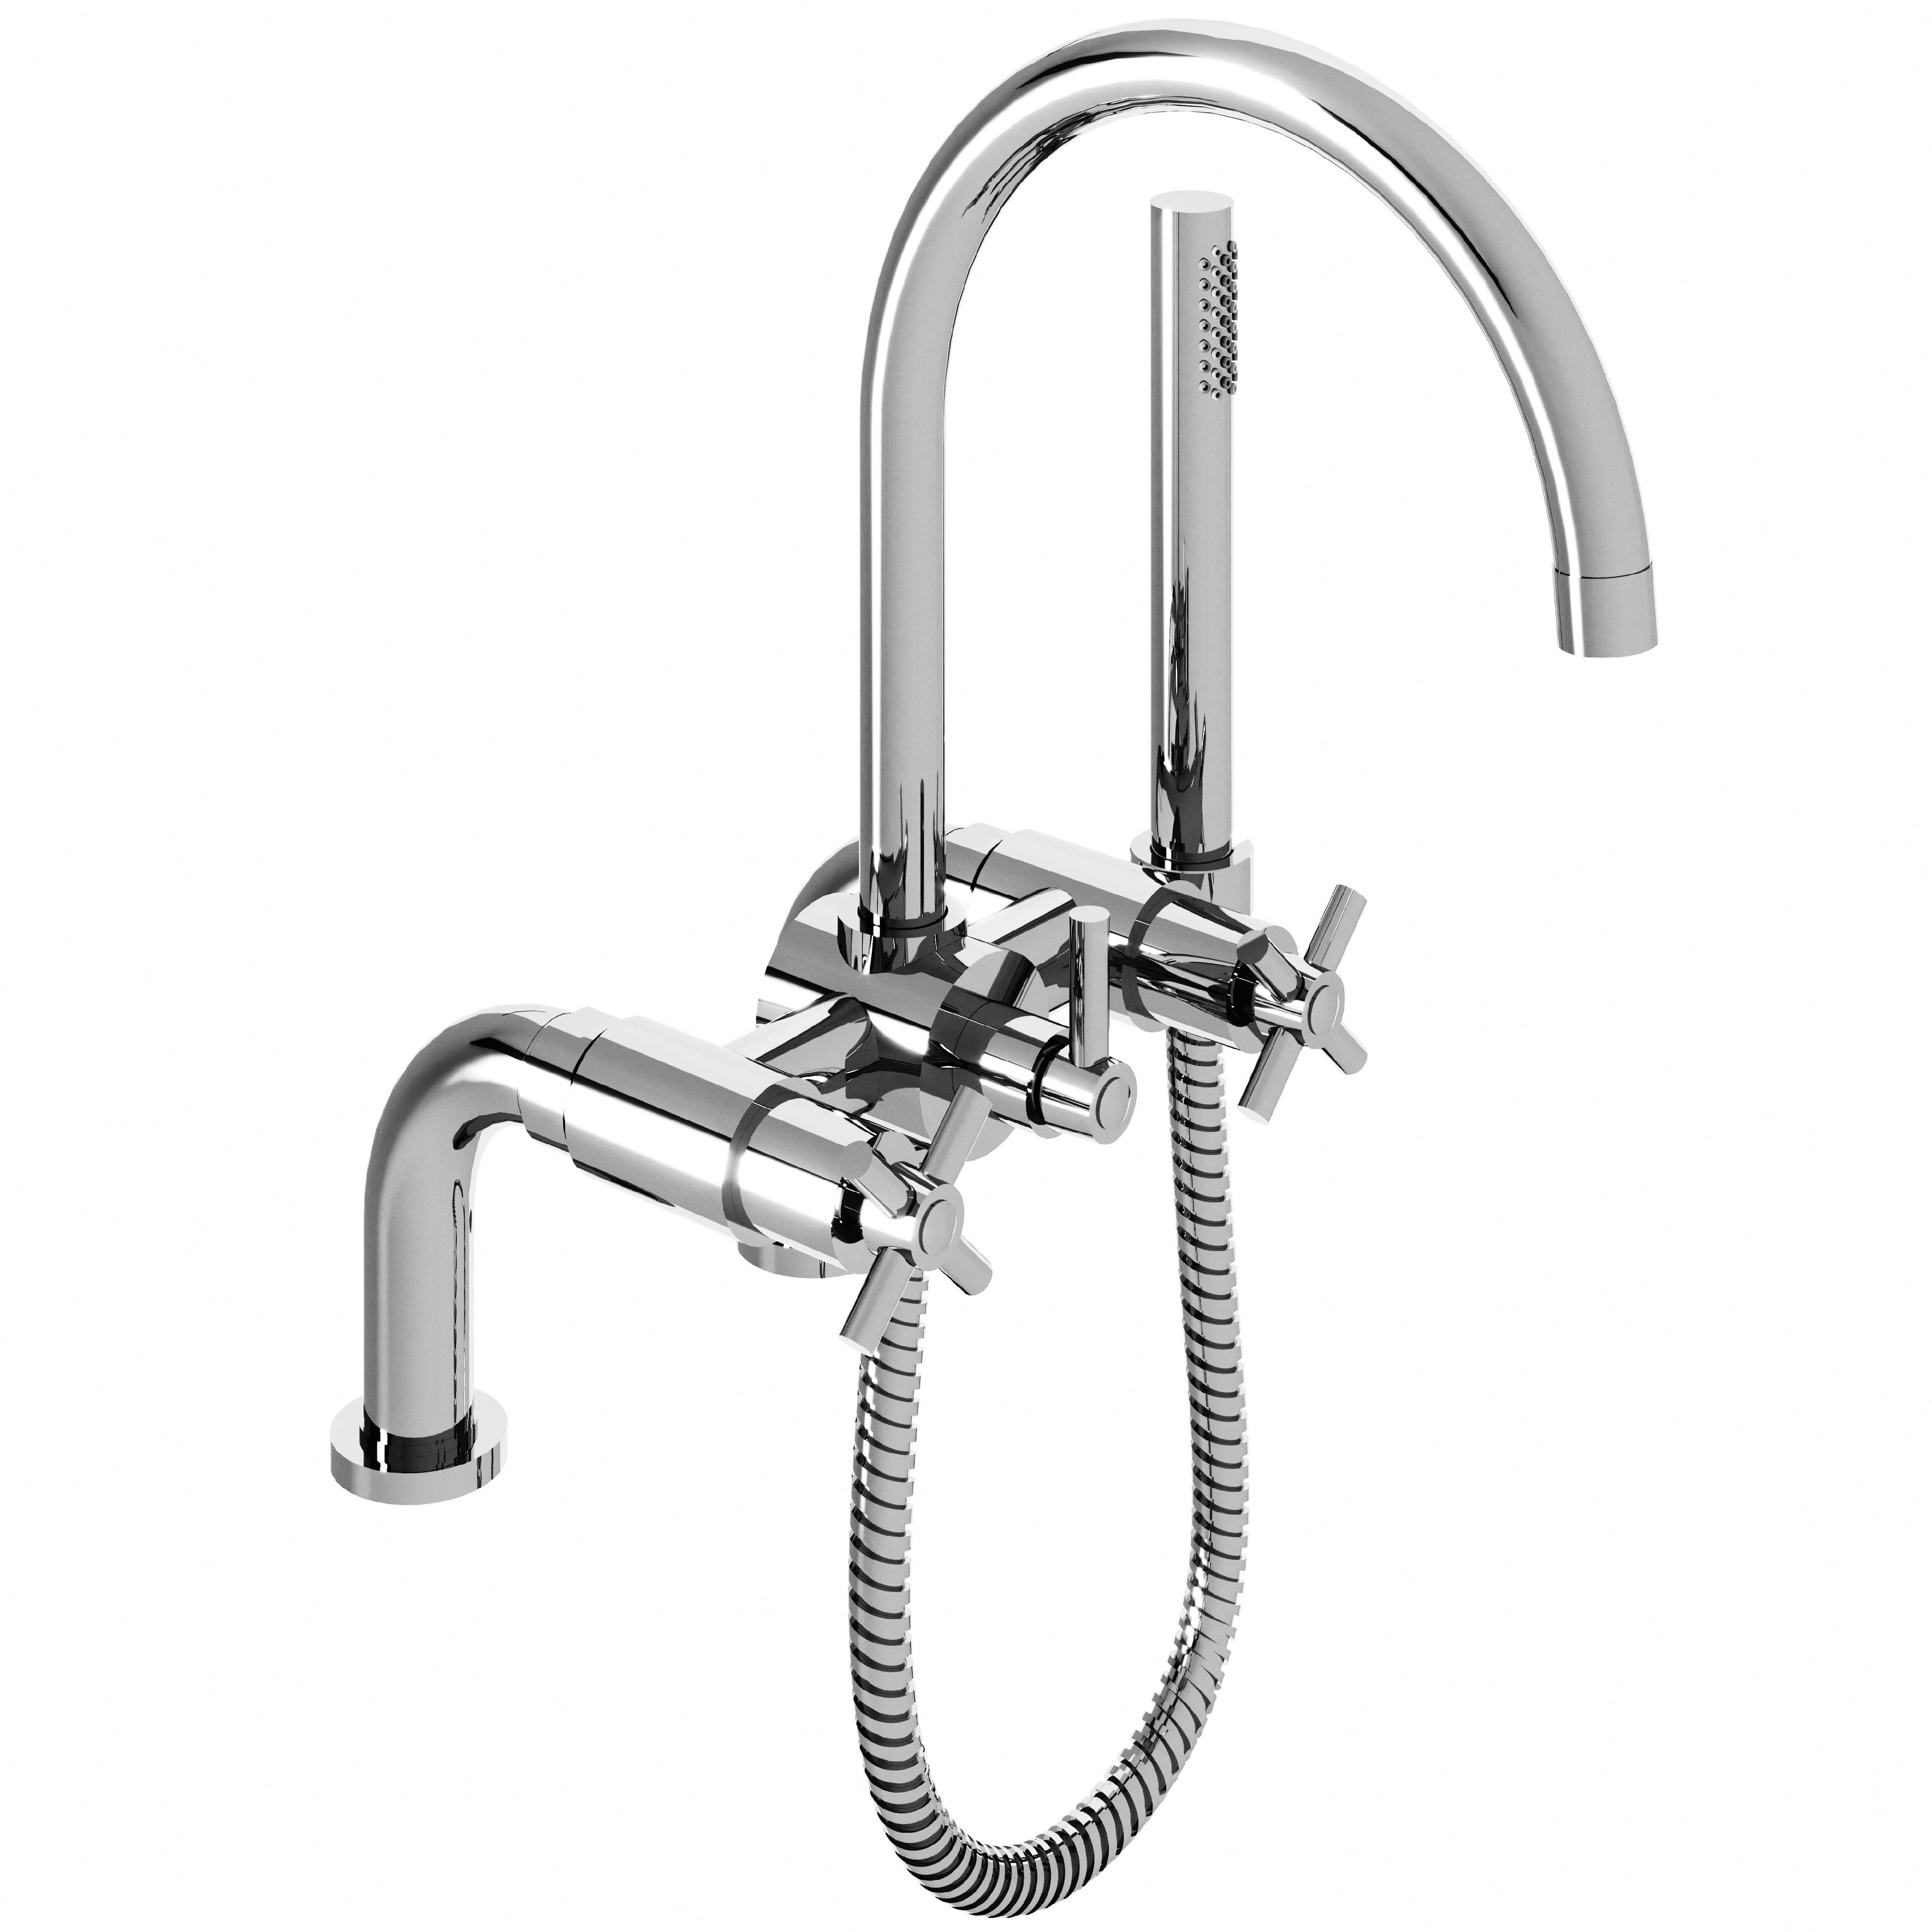 M90-3306 Rim mounted bath and shower mixer